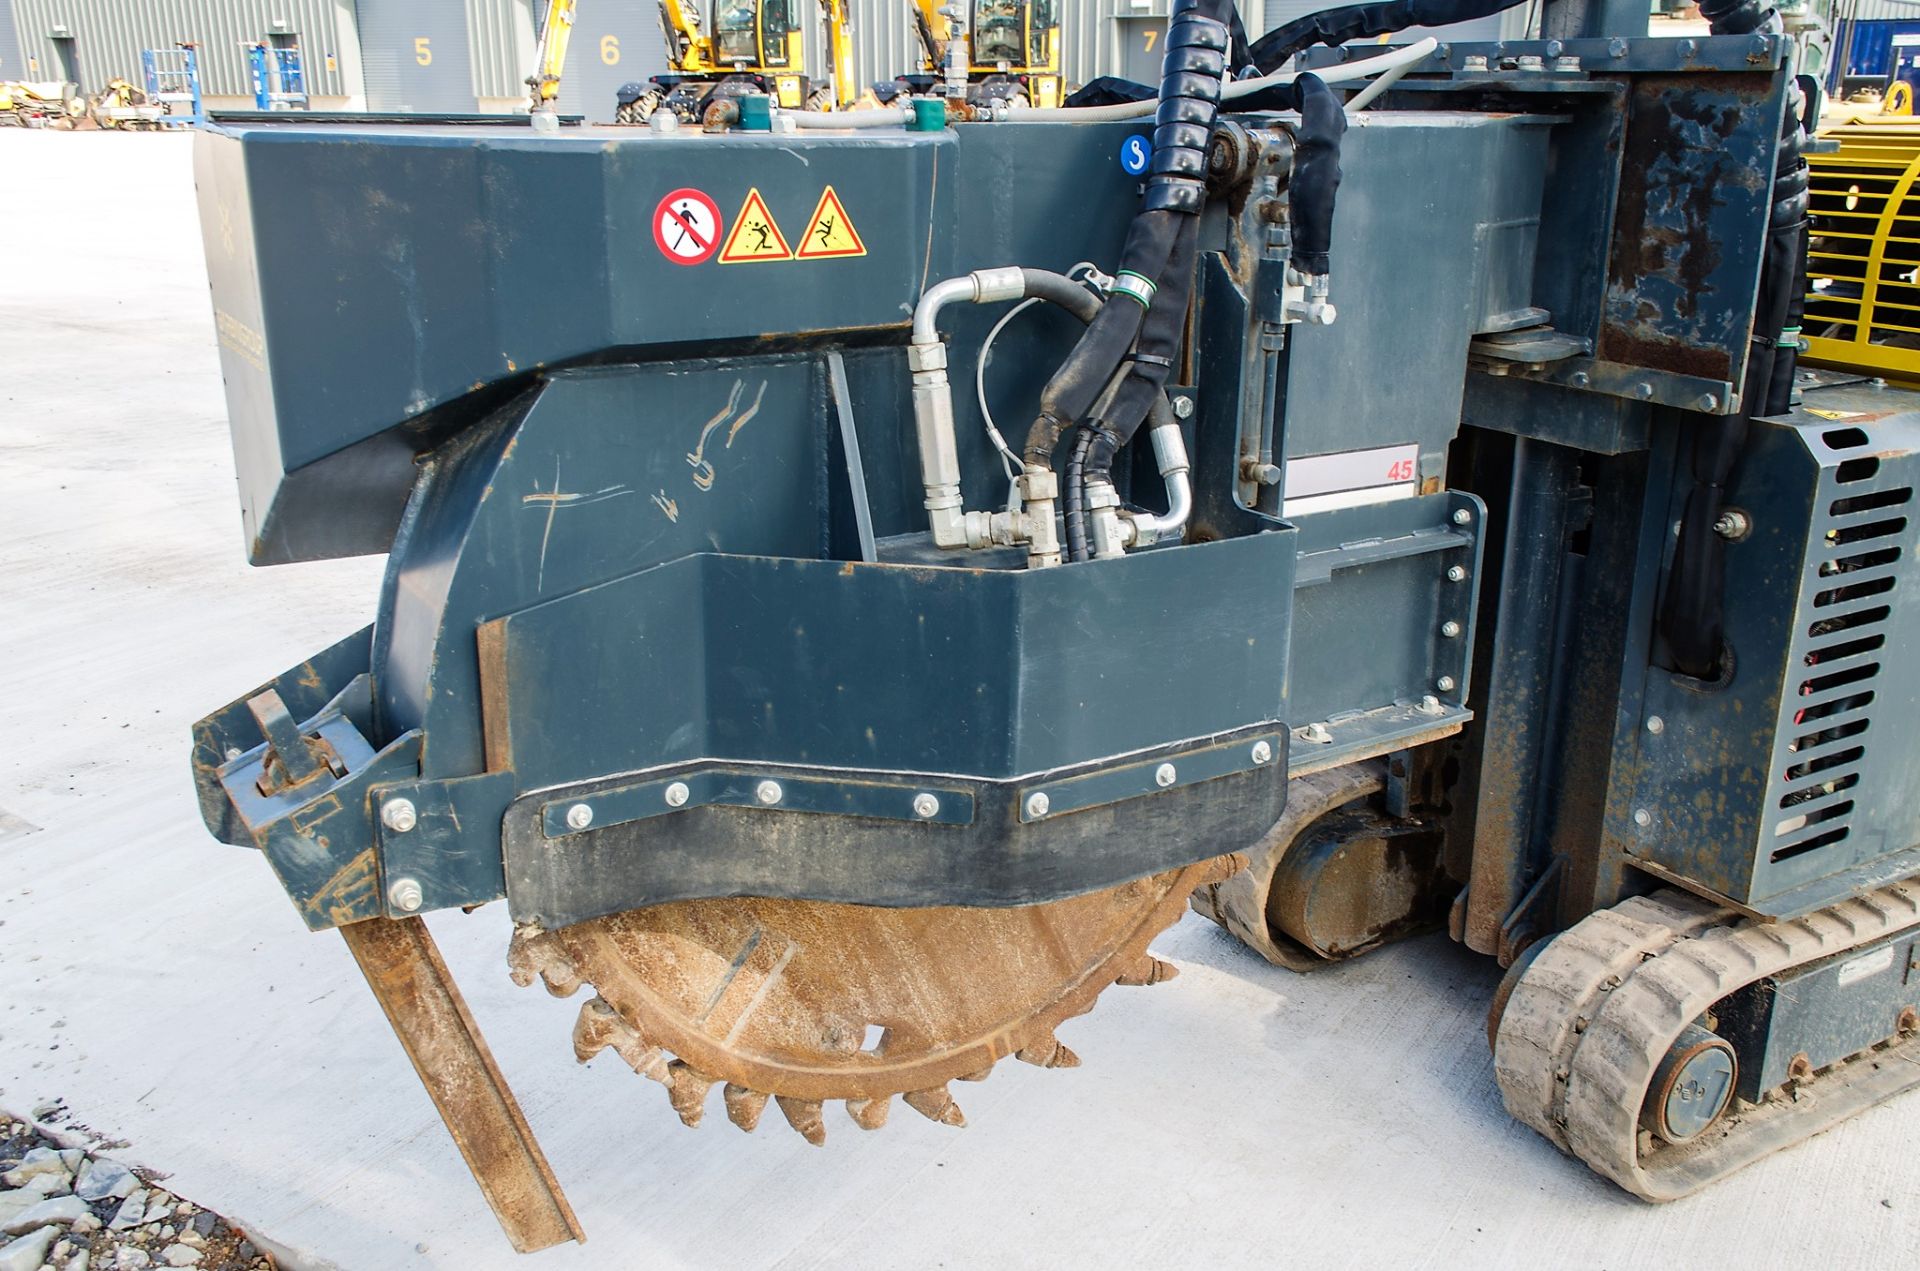 GarbinGroup Fiber 450E diesel driven tracked micro trencher Year: 2020 S/N: 1726 Recorded Hours: - Image 11 of 15